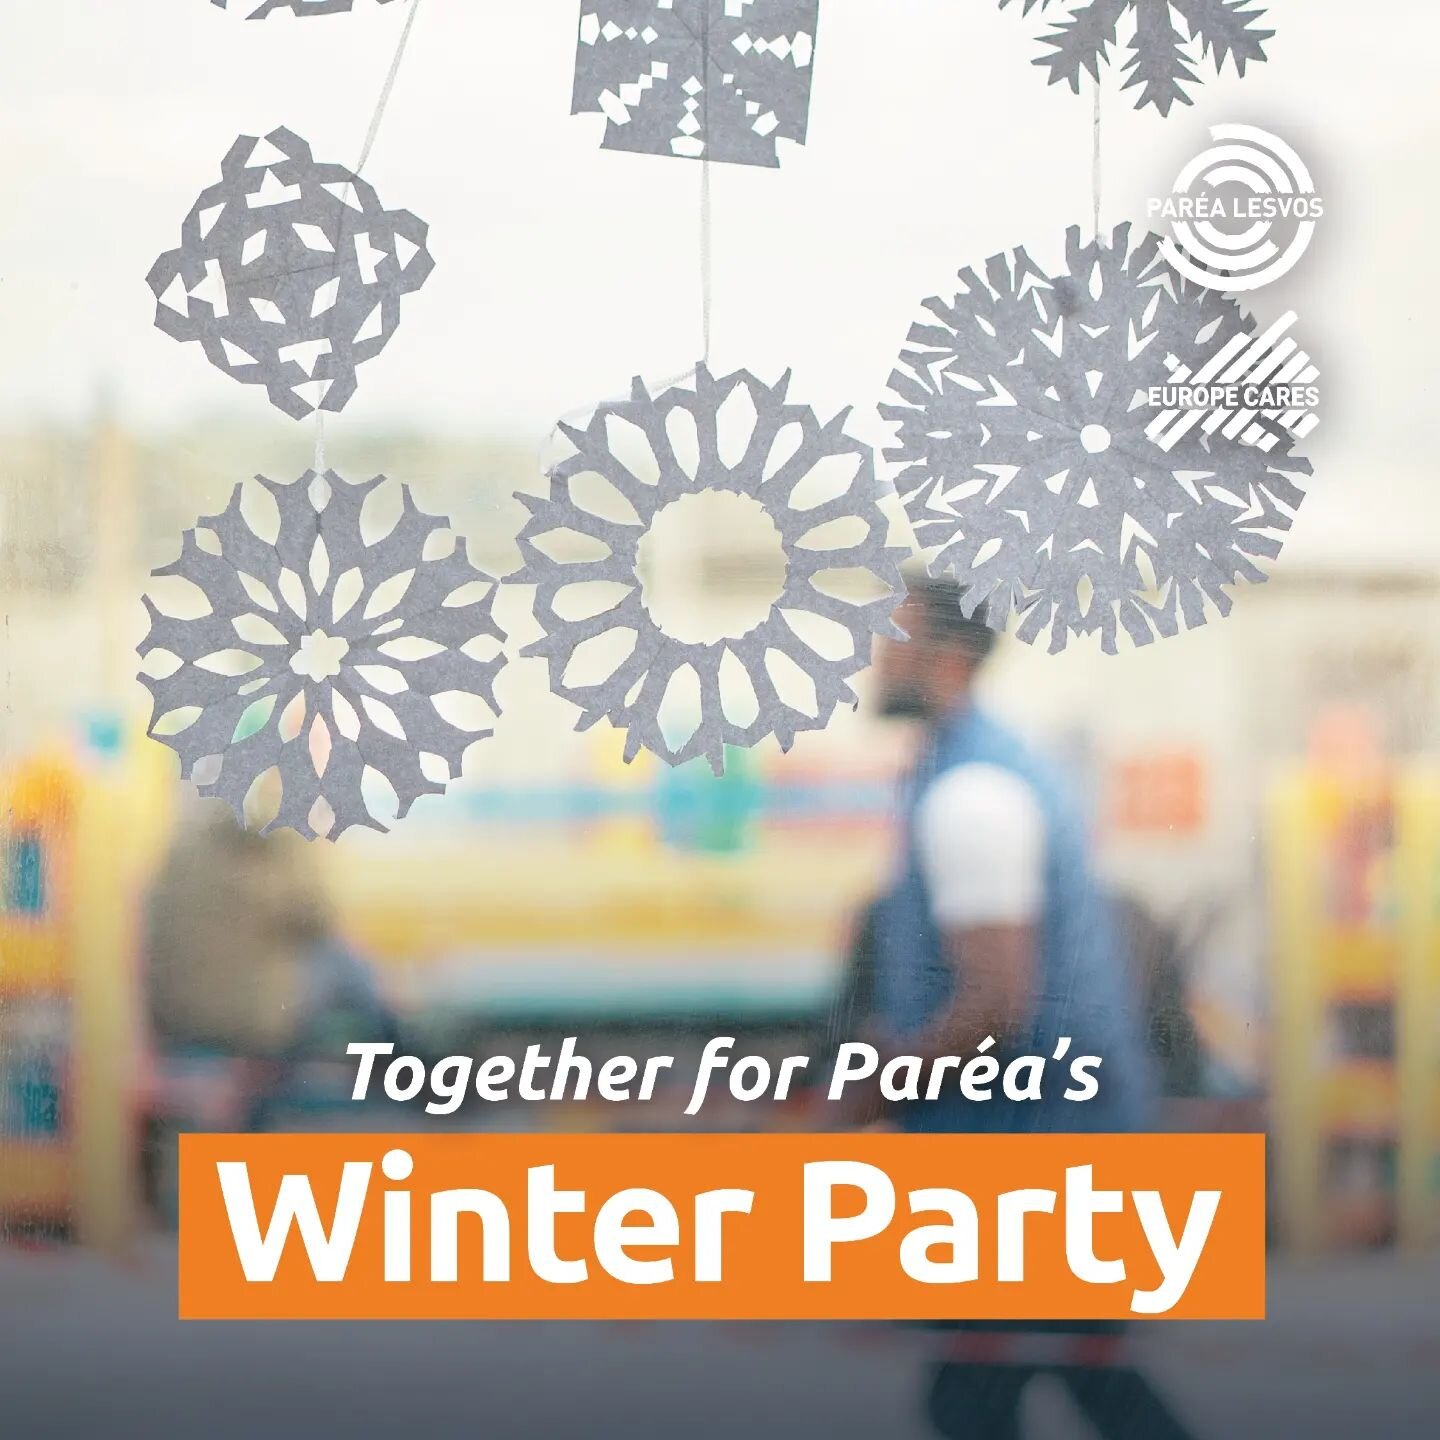 Last week we celebrated the Par&eacute;a Winter Party!! ❄️

Thank you to the 800+ people that joined us, together we had an amazing day! 

Alongside our regular programs, the Main Hall featured a variety of different fun activities. 🥳

Visitors coul